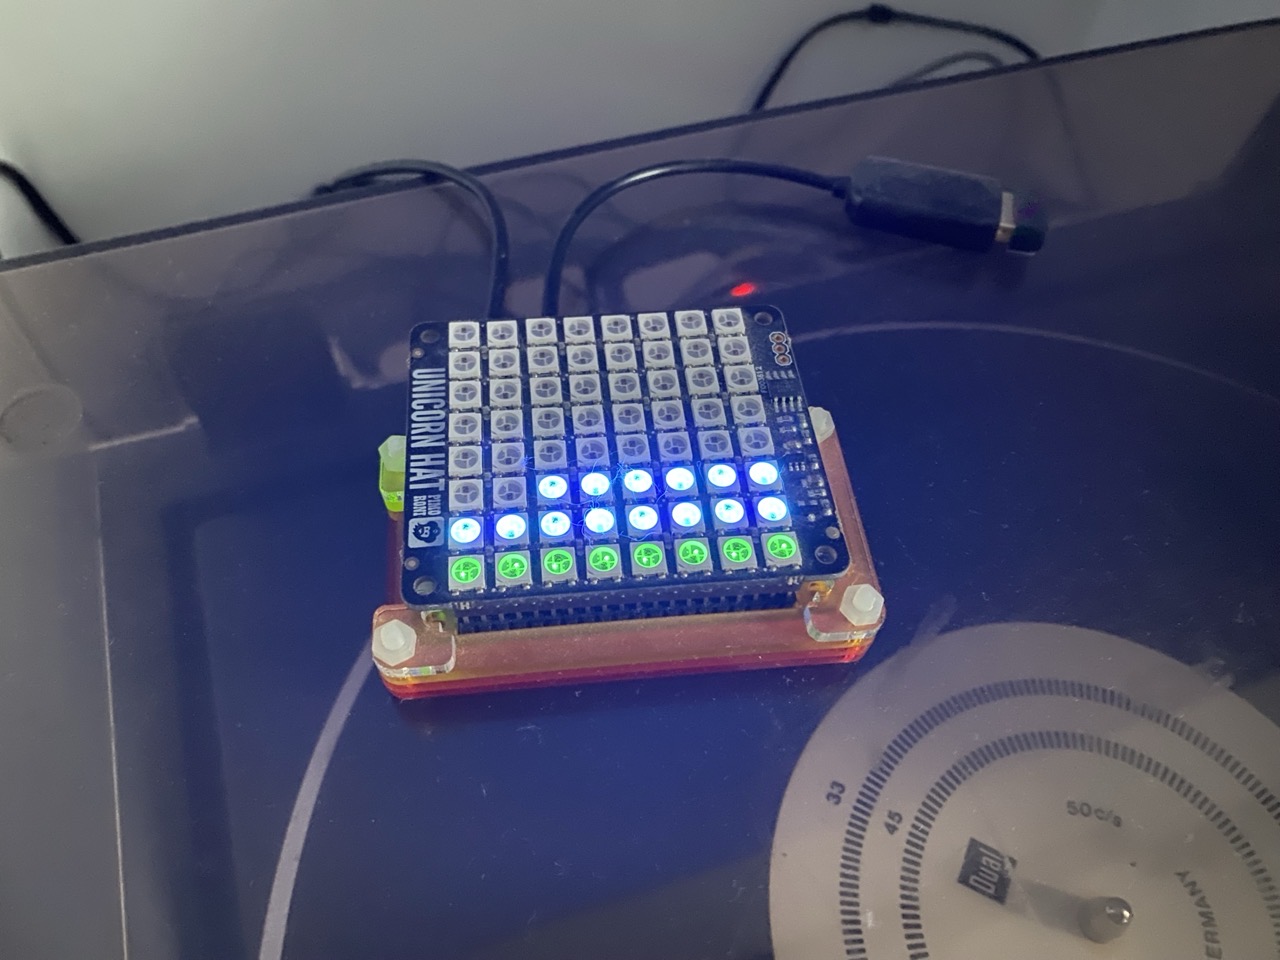 A raspberry pi zero with a grid of lights on it. The lights are blue and green in a pattern that suggests a graph over time. Two people are in game.